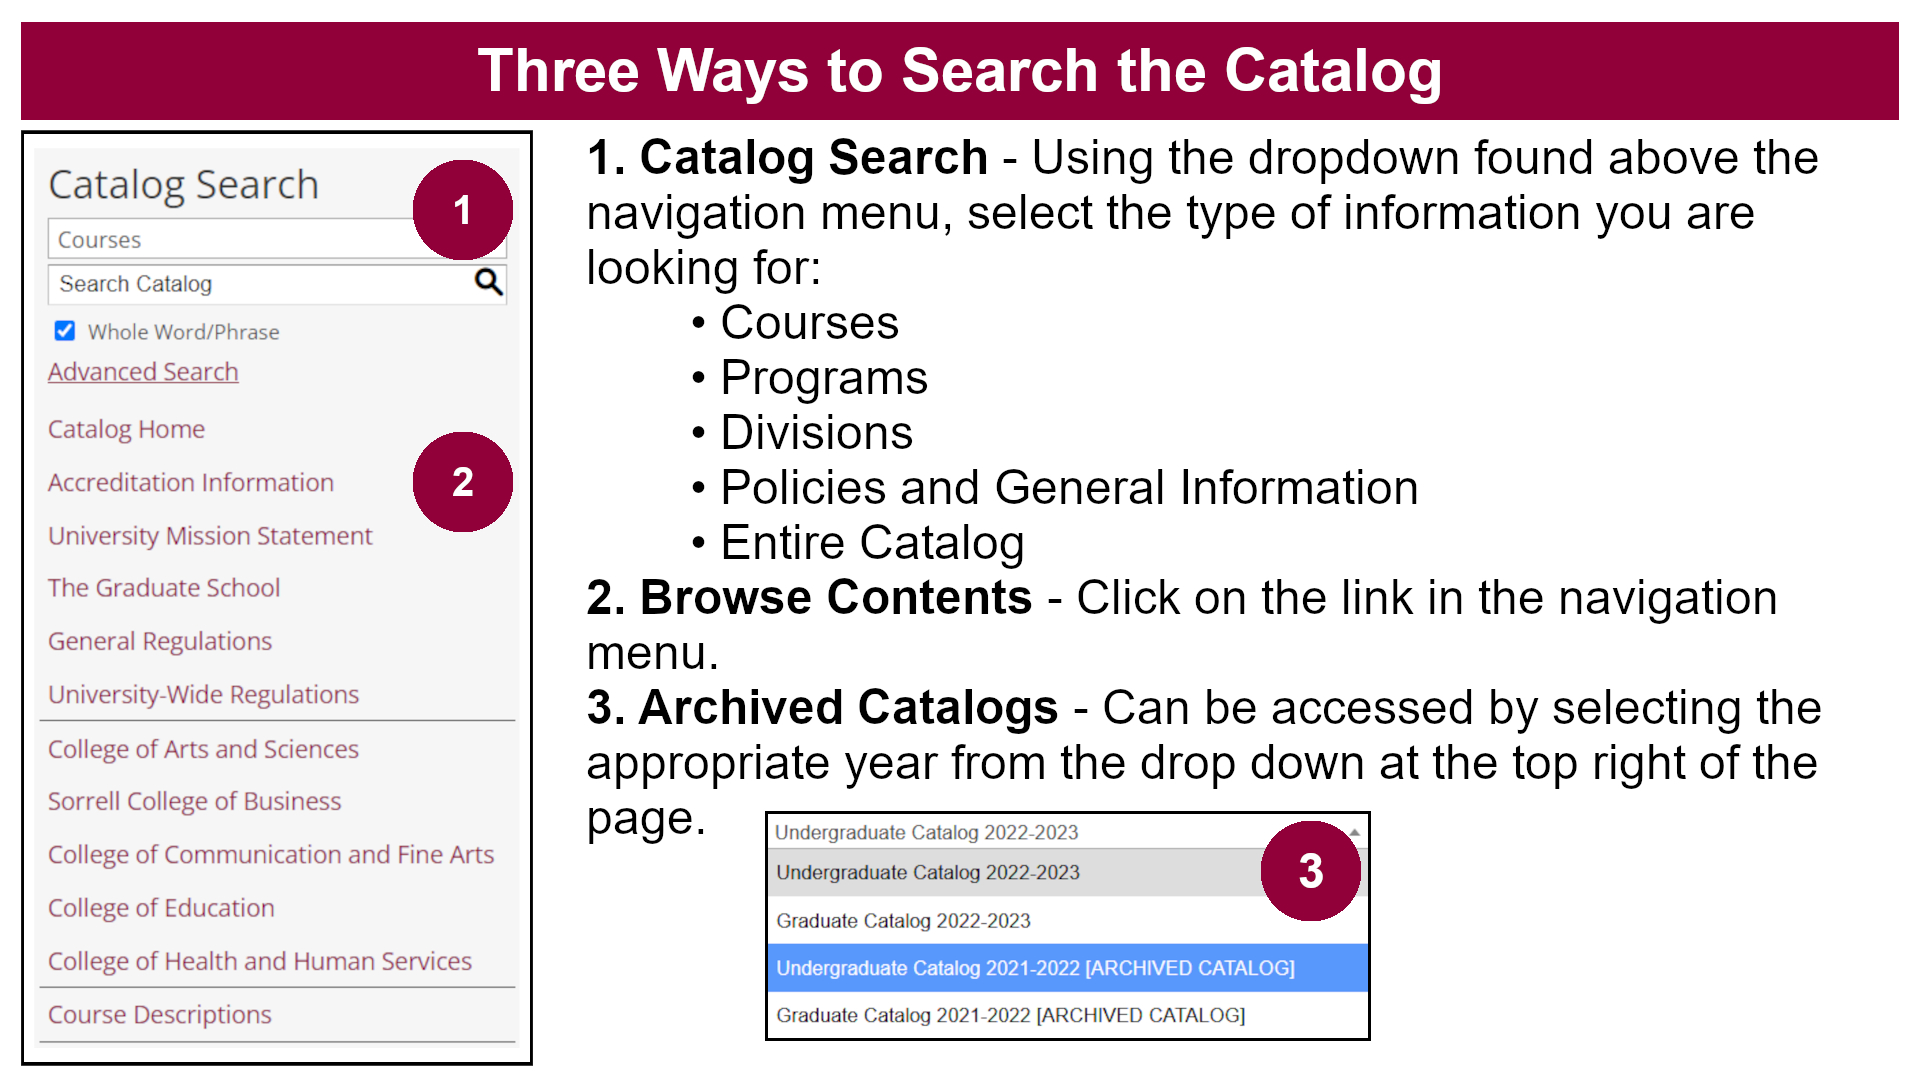 Catalog Search Instructions